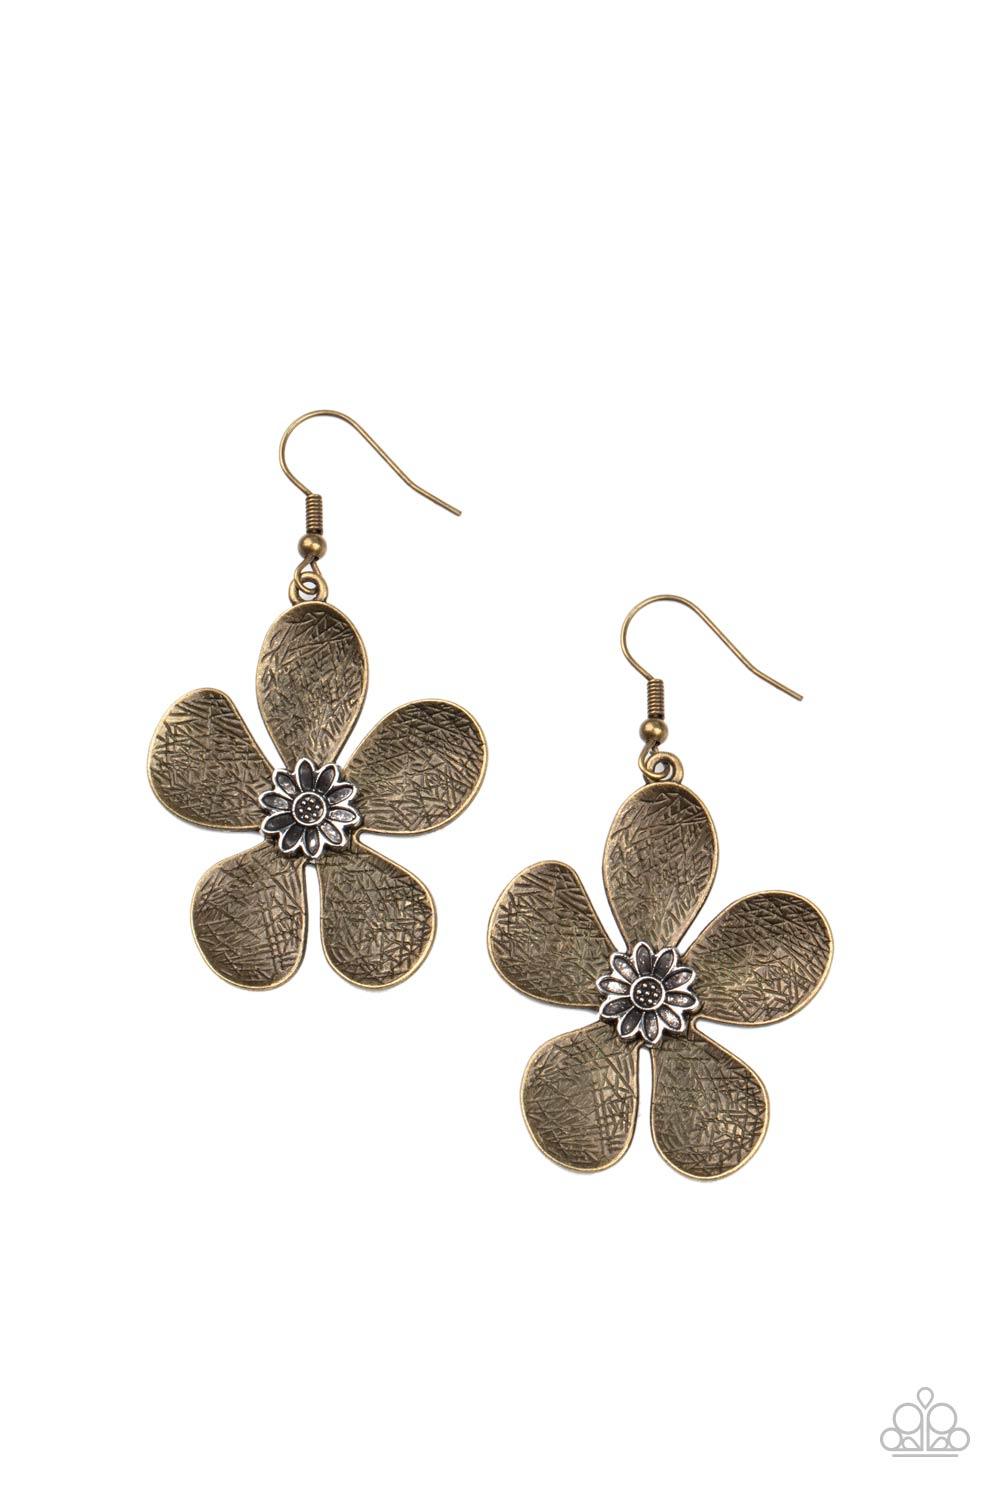 Paparazzi Accessories Fresh Florals - Brass Rustically etched brass petals bloom from a silver floral adorned center, creating a whimsical display. Earring attaches to a standard fishhook fitting. Sold as one pair of earrings. Jewelry